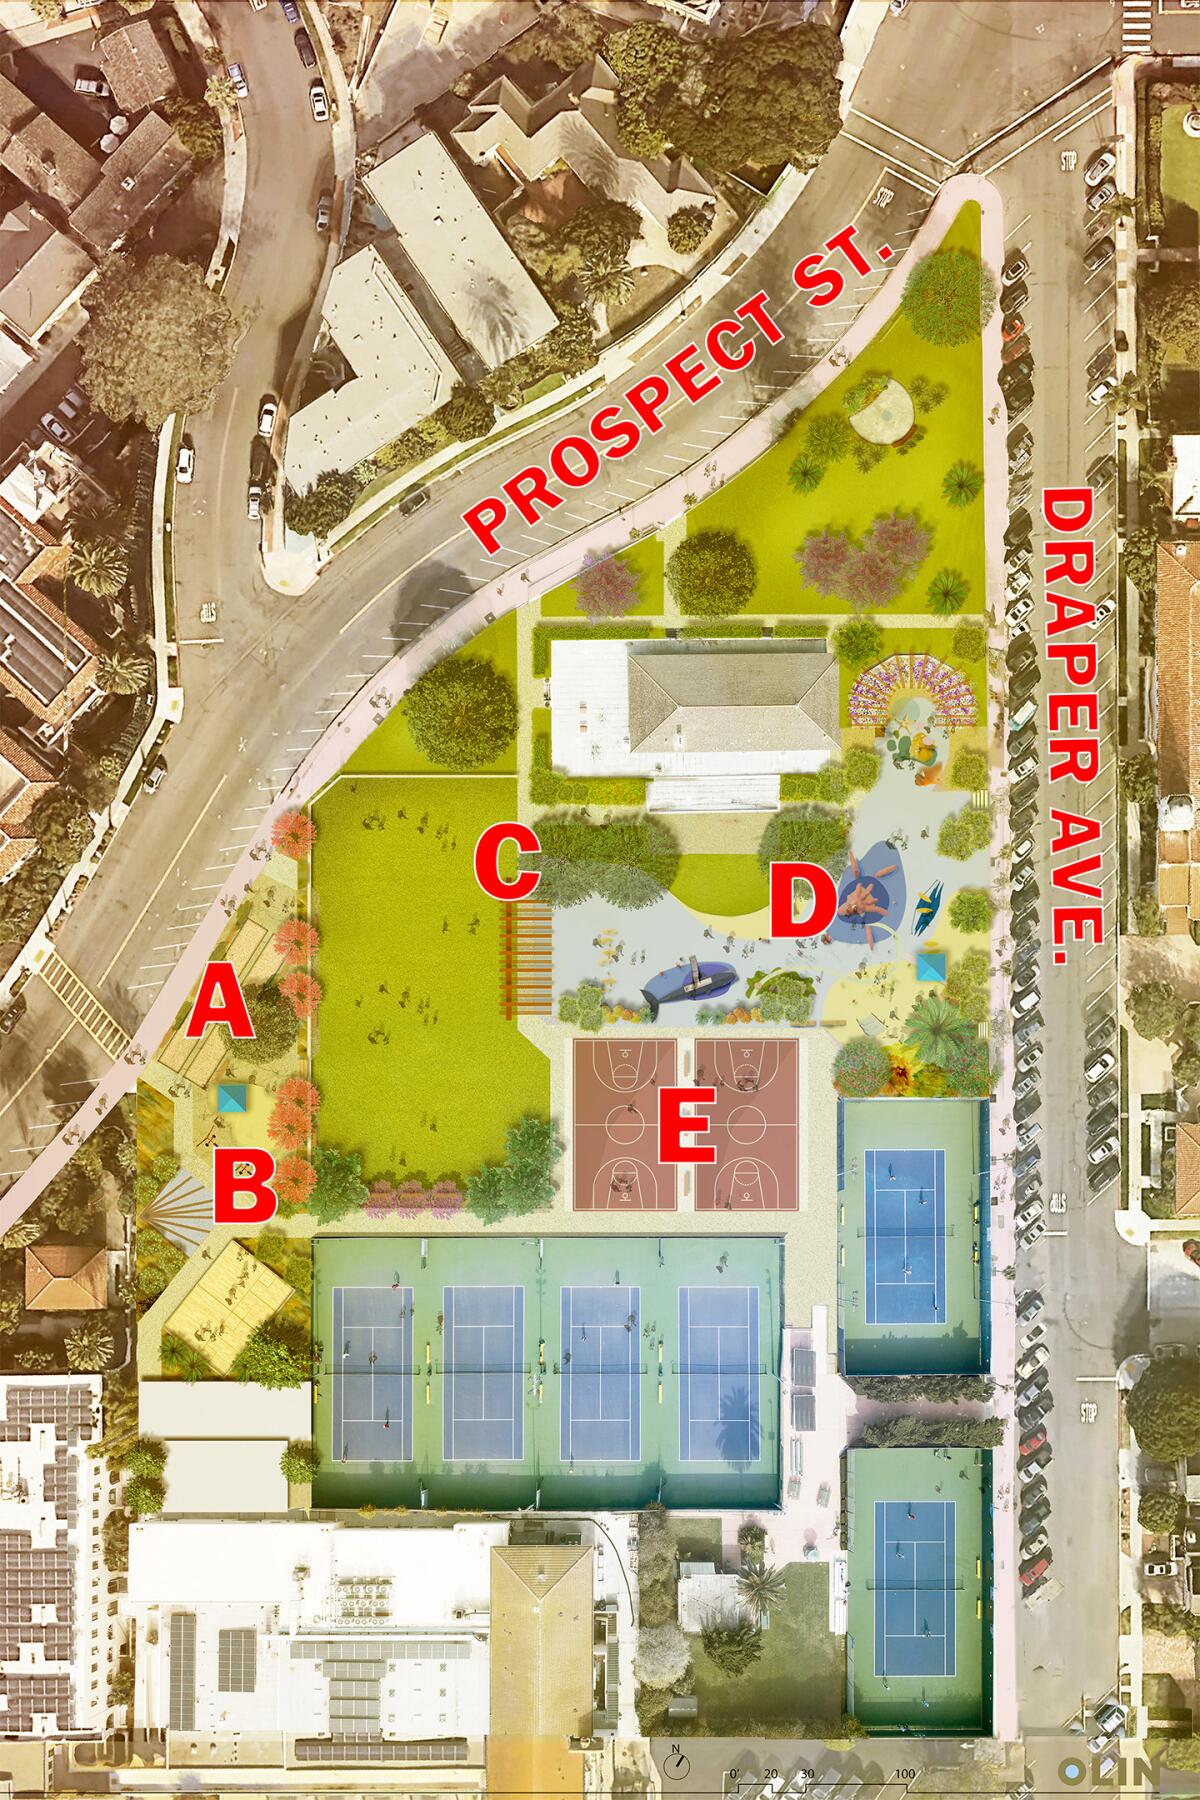 The preliminary proposed site plan for the La Jolla Recreation Center, as announced in February.